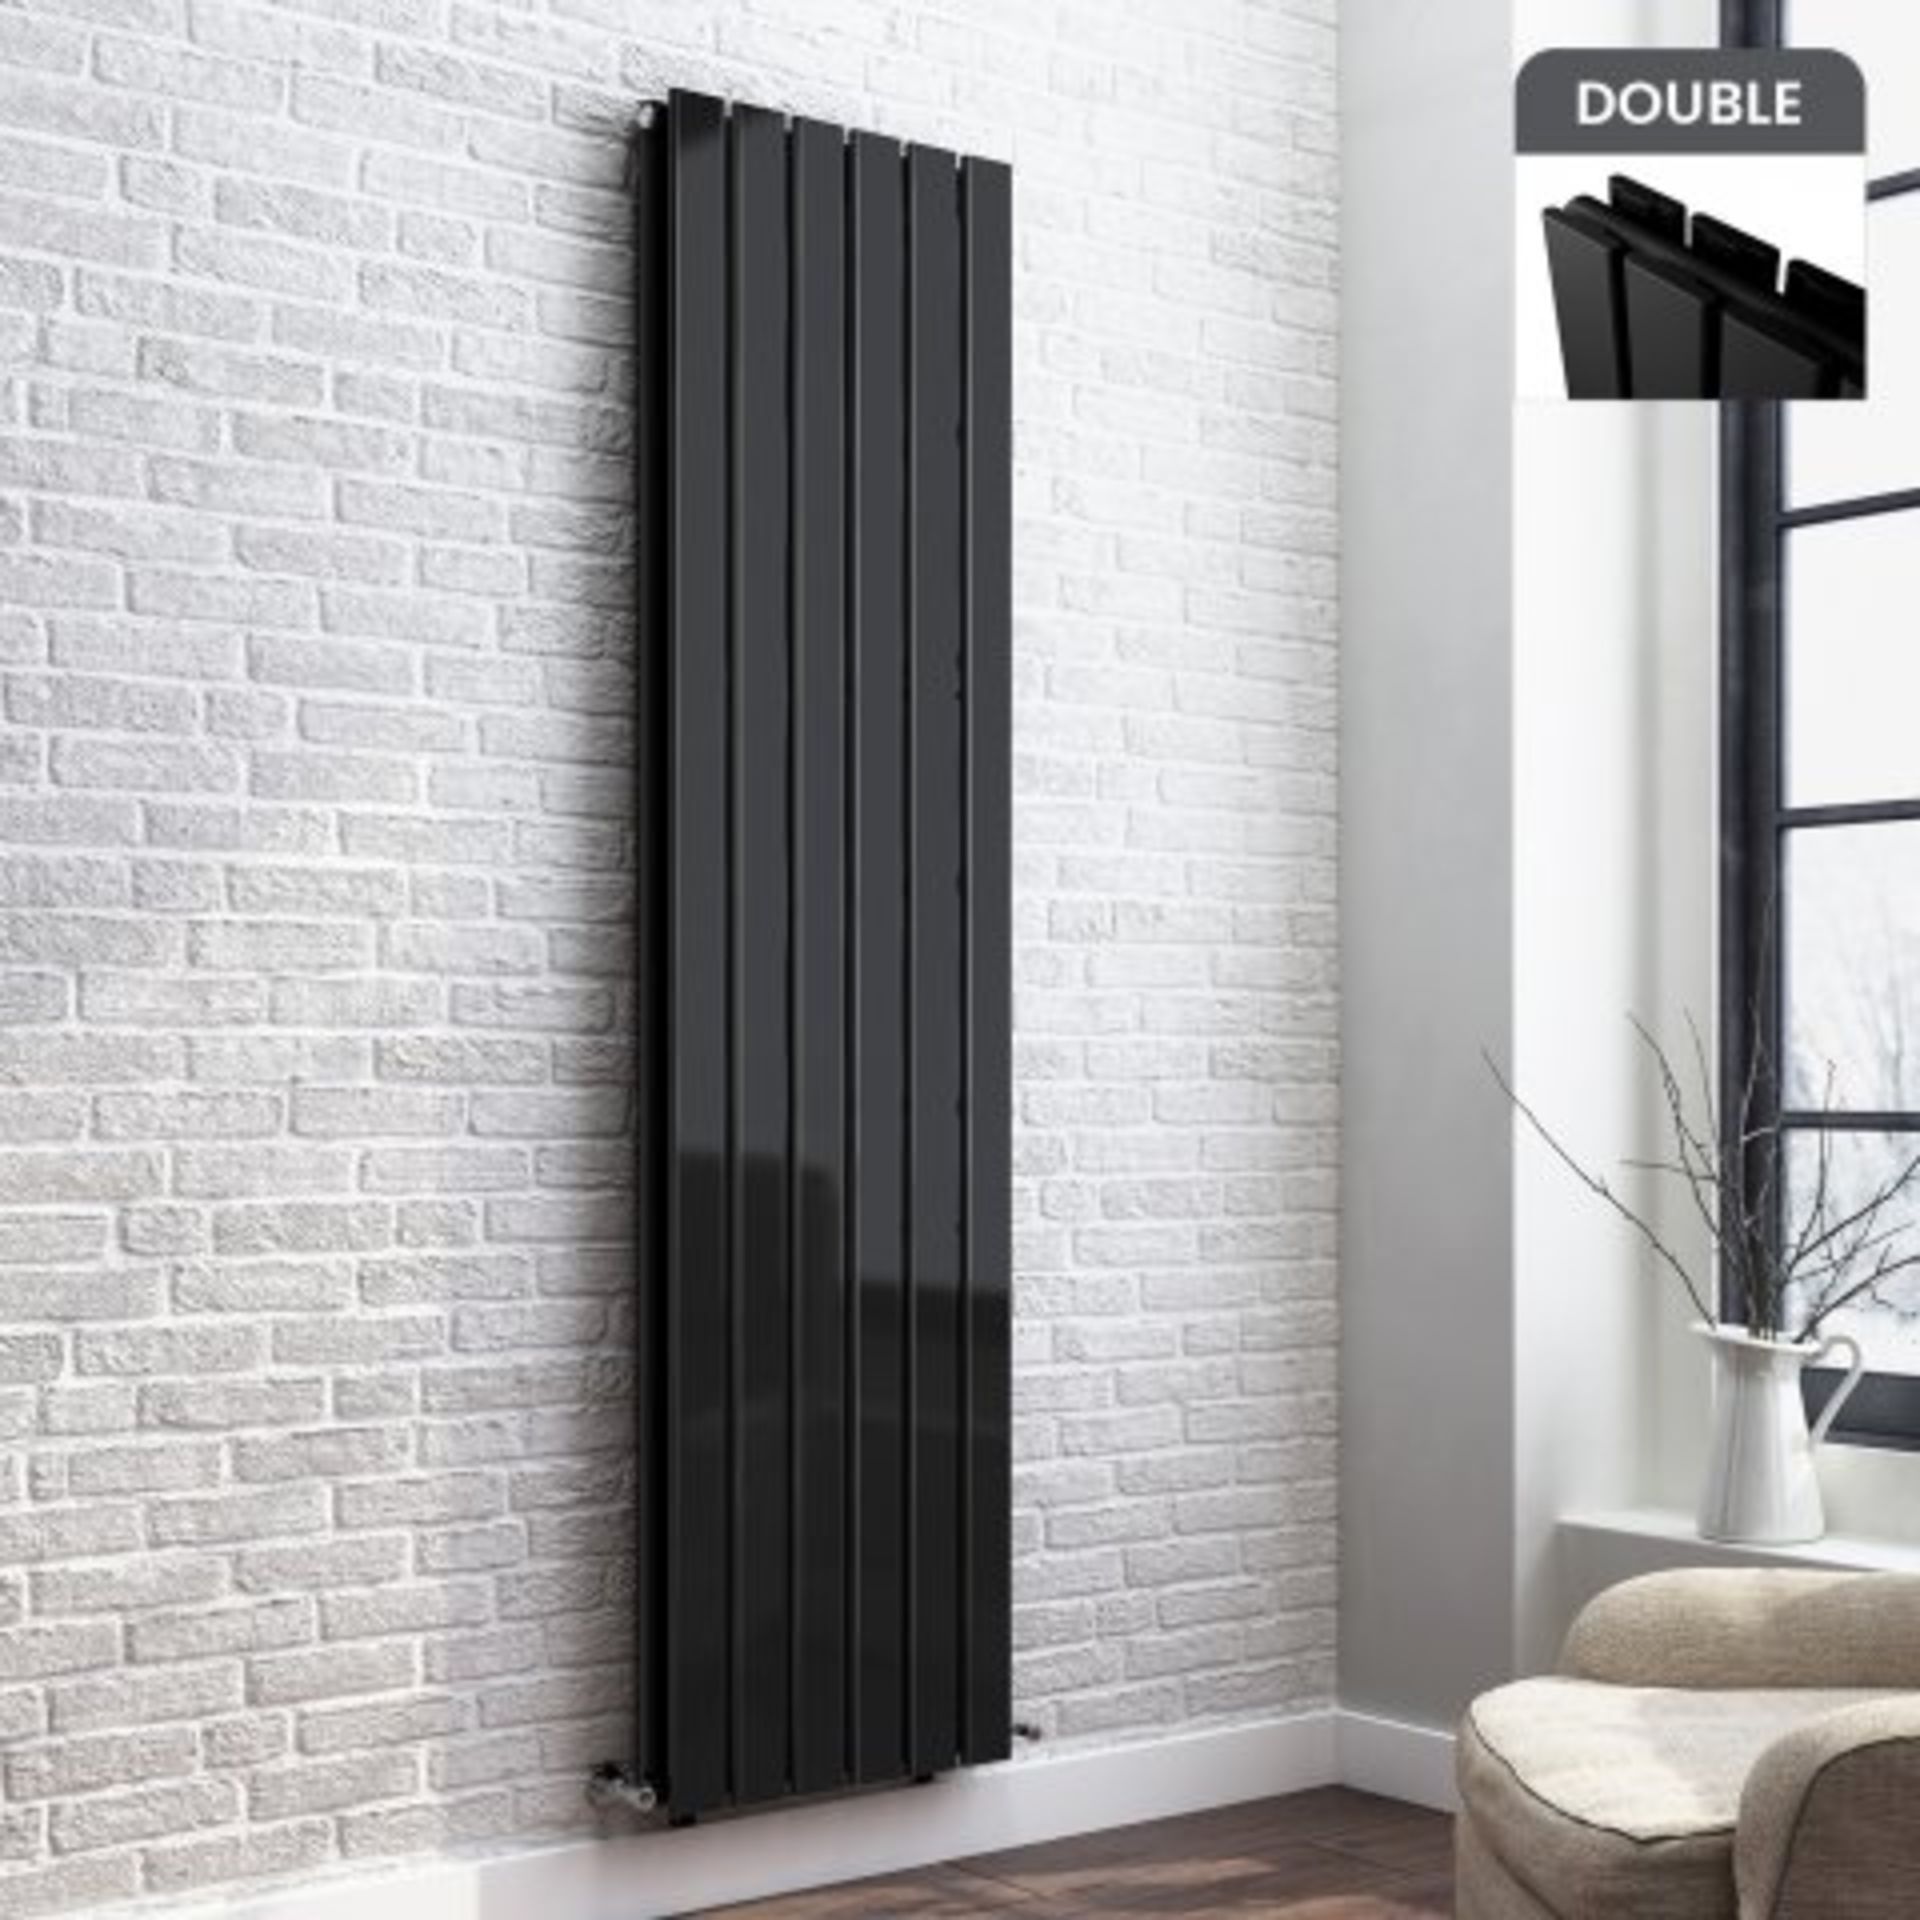 (AA165) 1800x458mm Gloss Black Double Flat Panel Vertical Radiator. RRP £499.99. Our Thera Flat